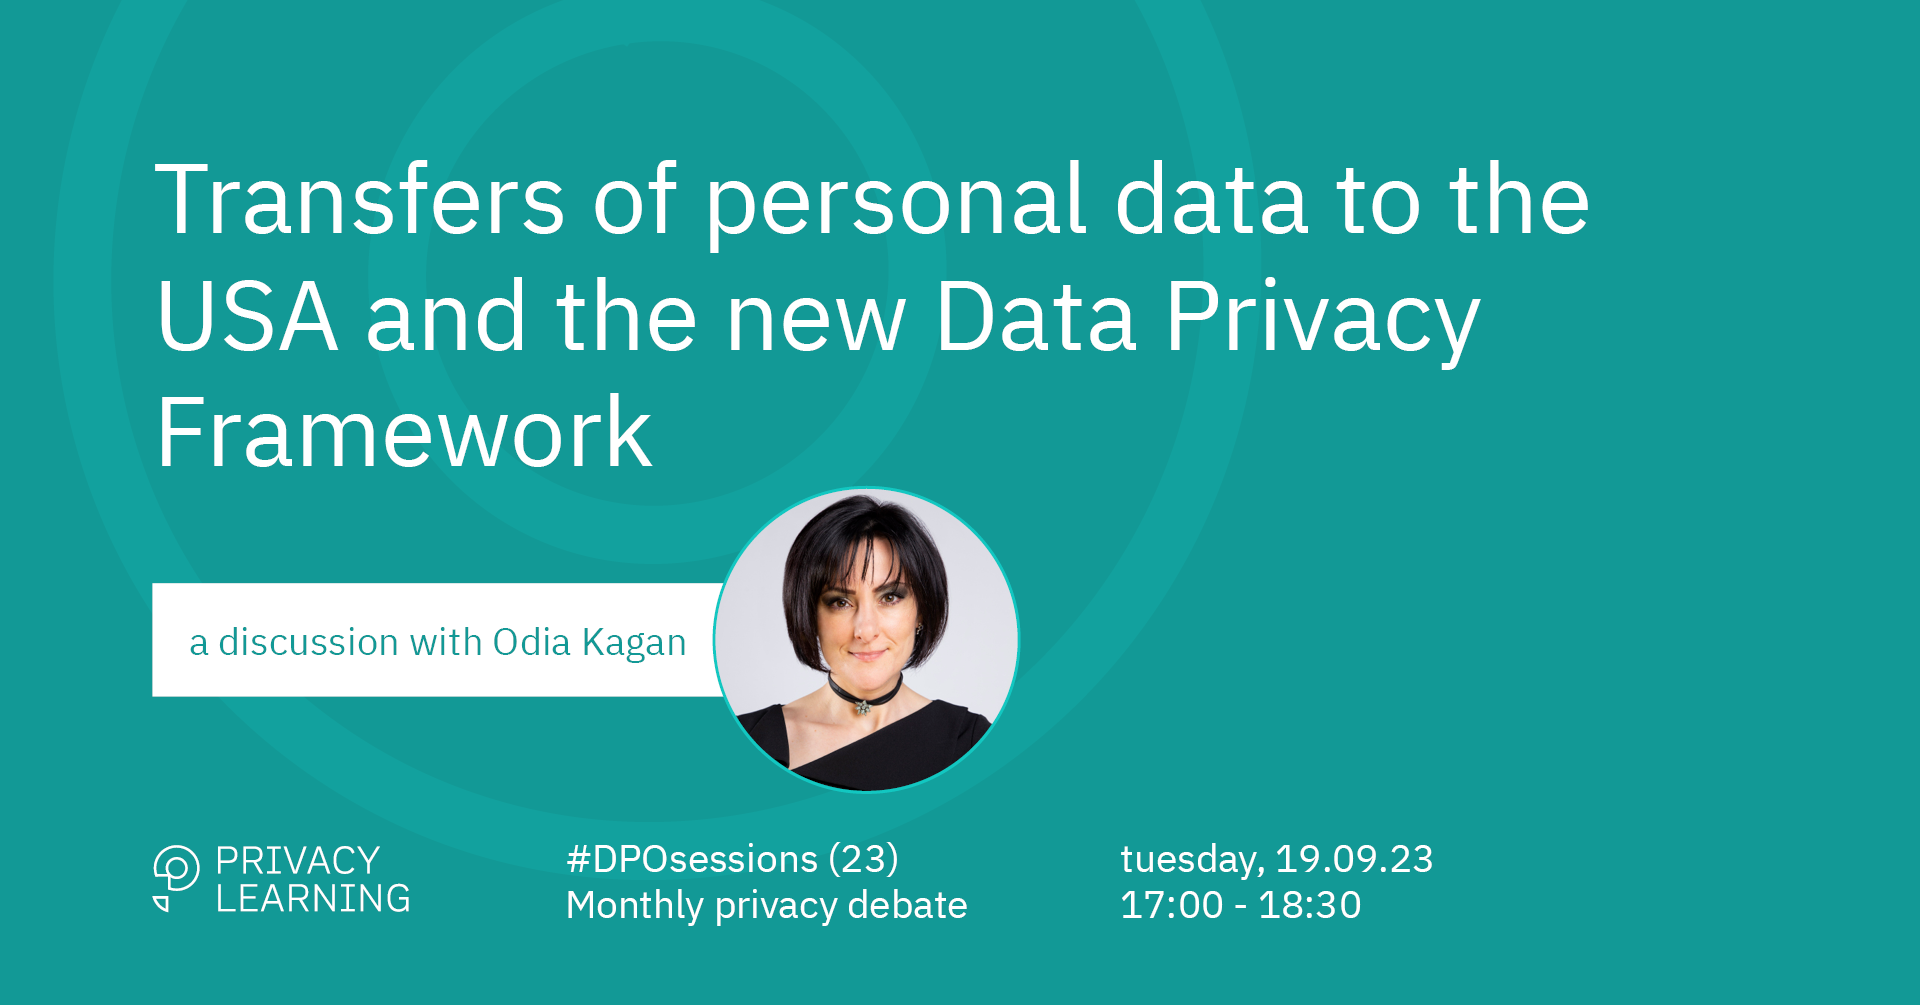 dposession 23 - Transfers of personal data to the USA and the new Data Privacy Framework (1)